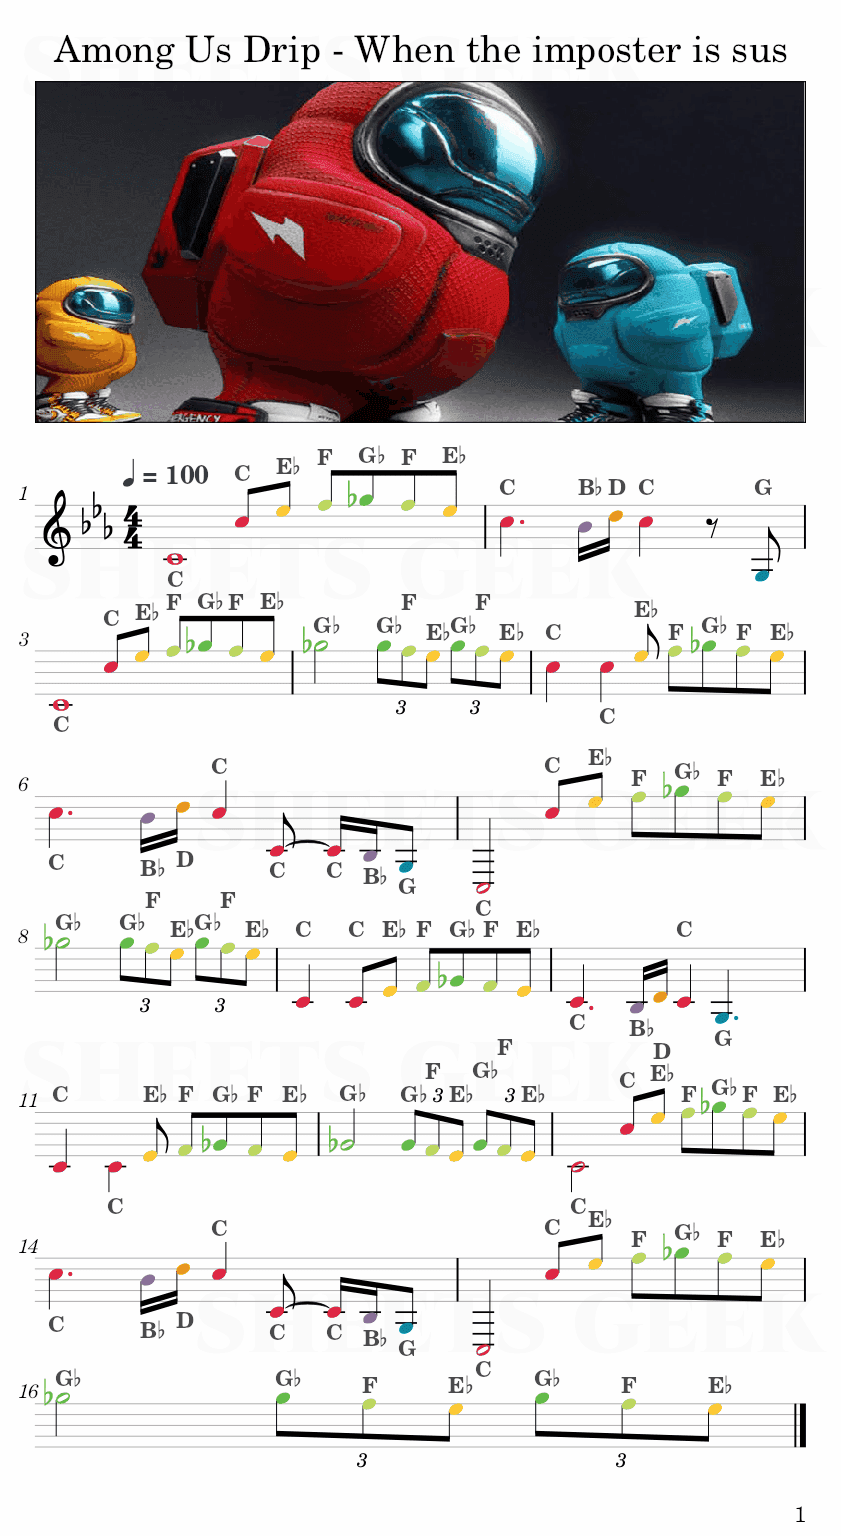 Among Us Drip - When the imposter is sus Easy Sheet Music Free for piano, keyboard, flute, violin, sax, cello page 1